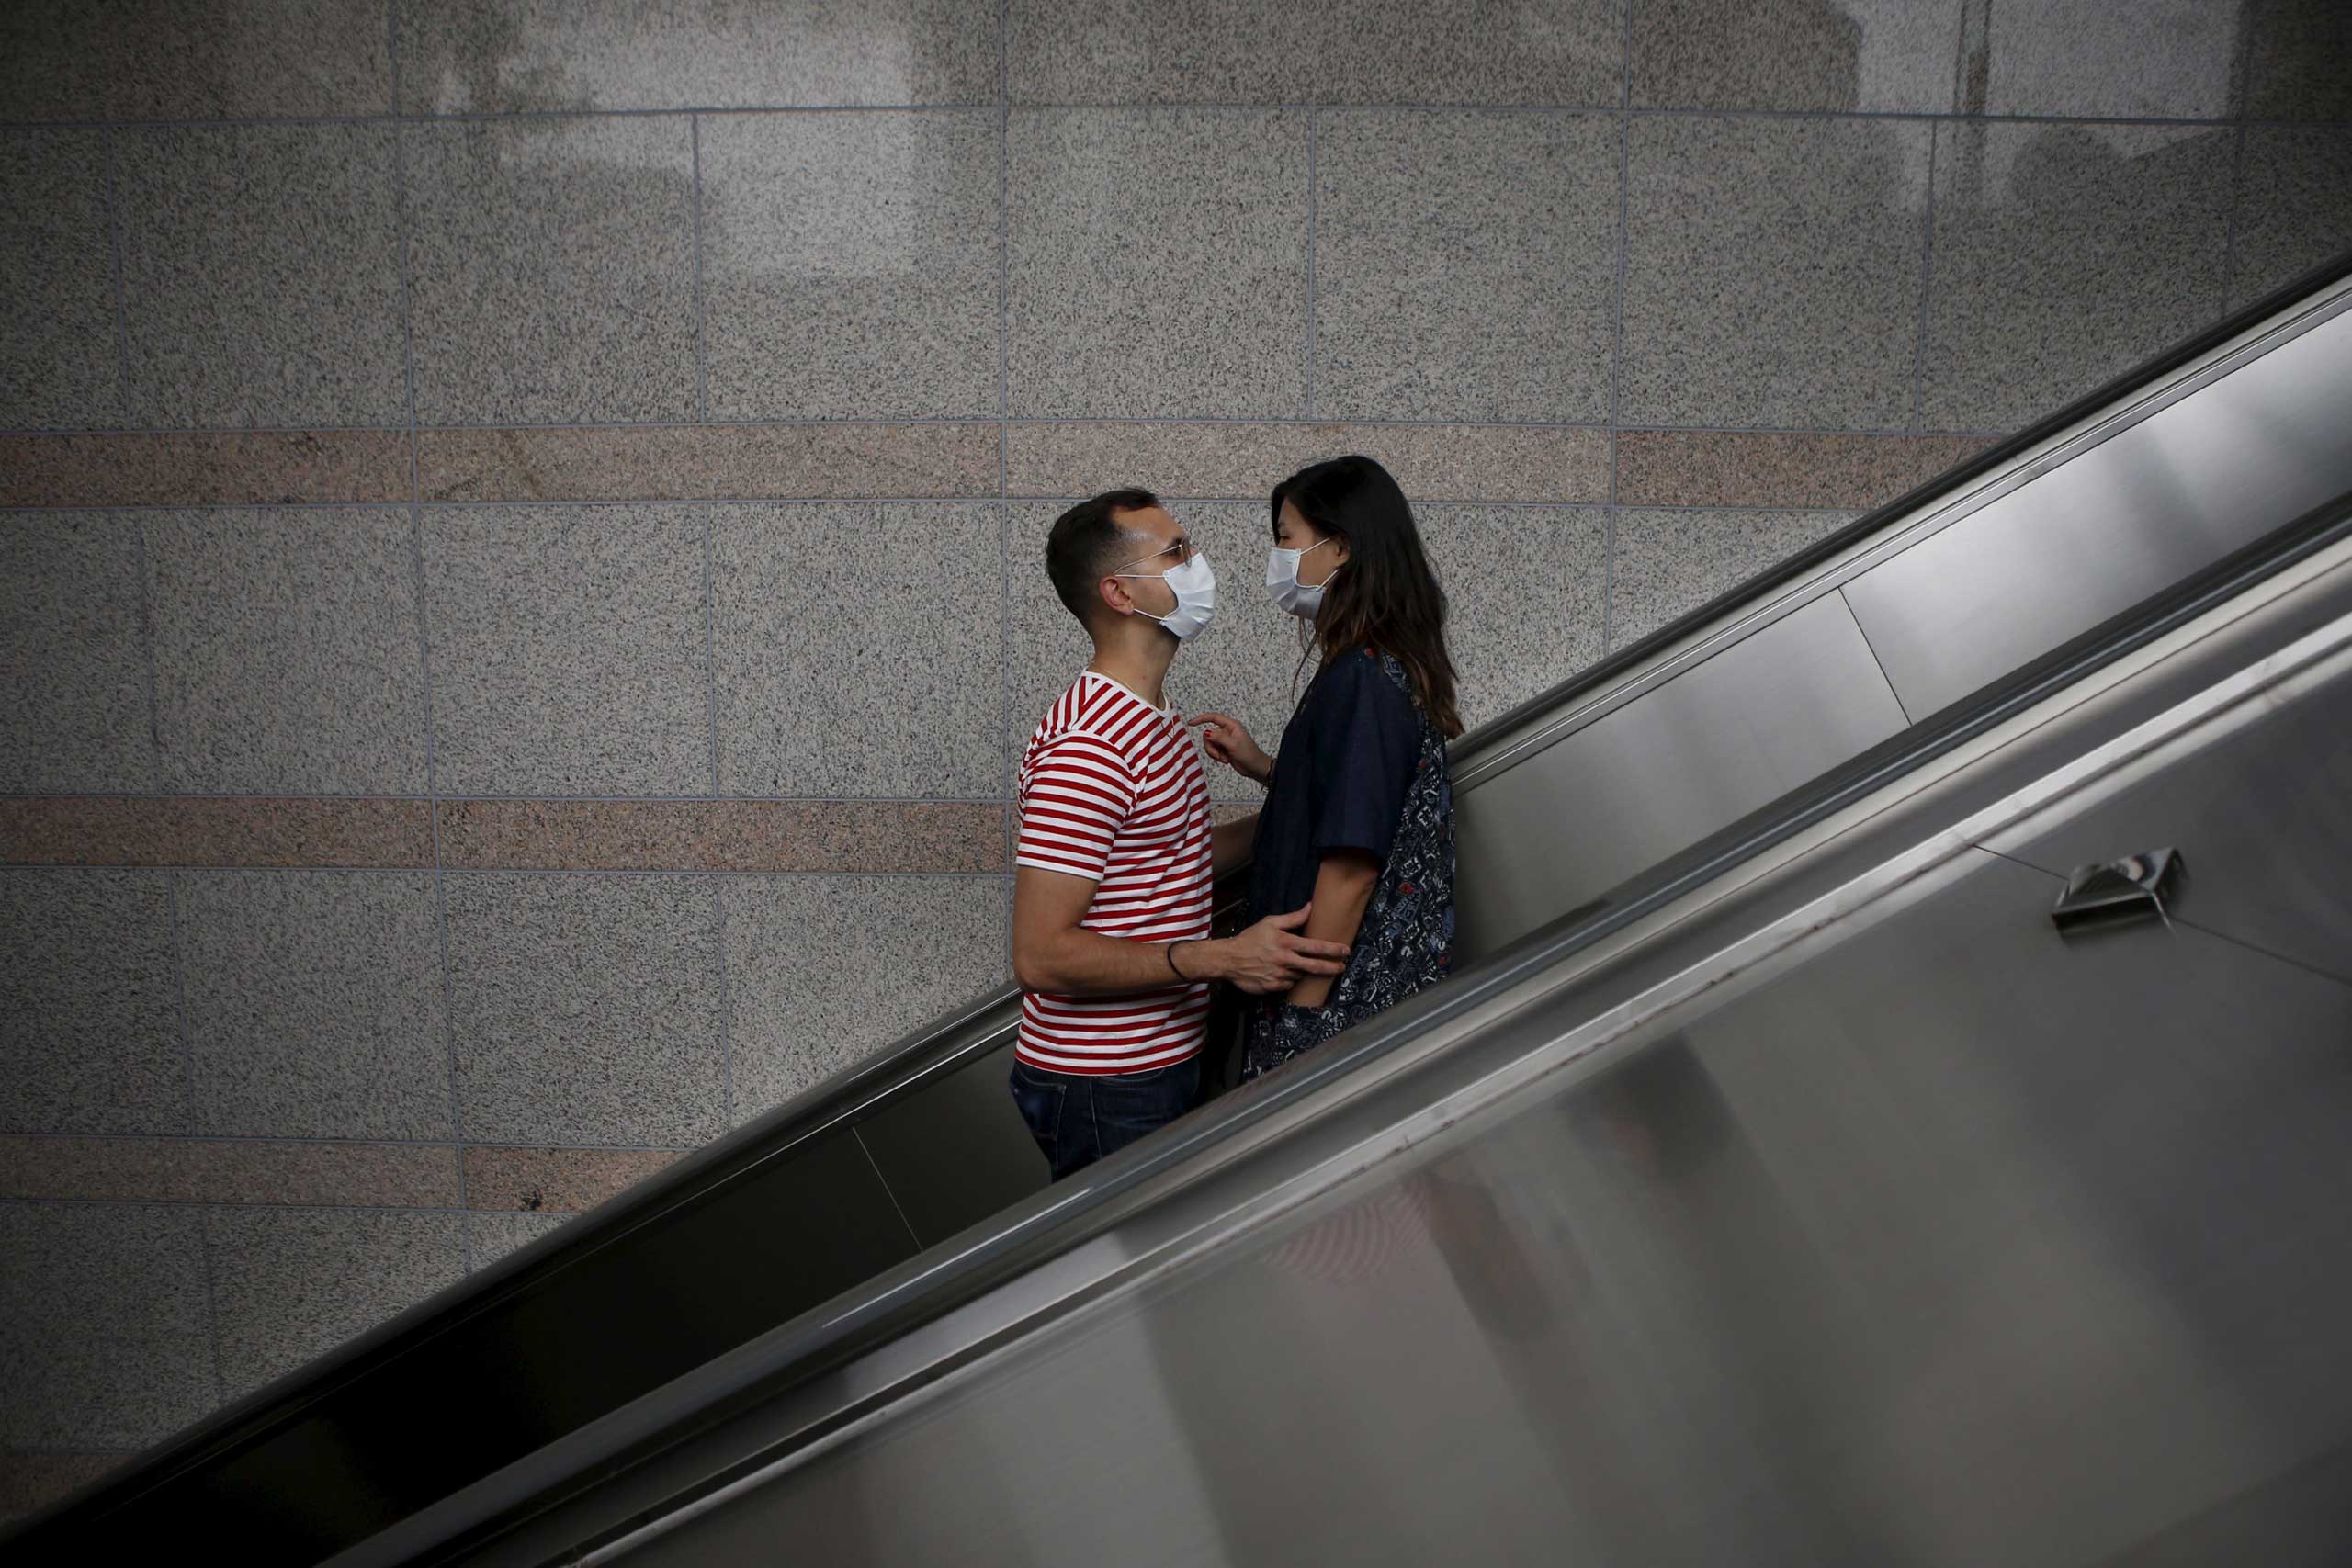 A couple wearing masks looks at each other as they ride on an escalator in Seoul on June 11, 2015.